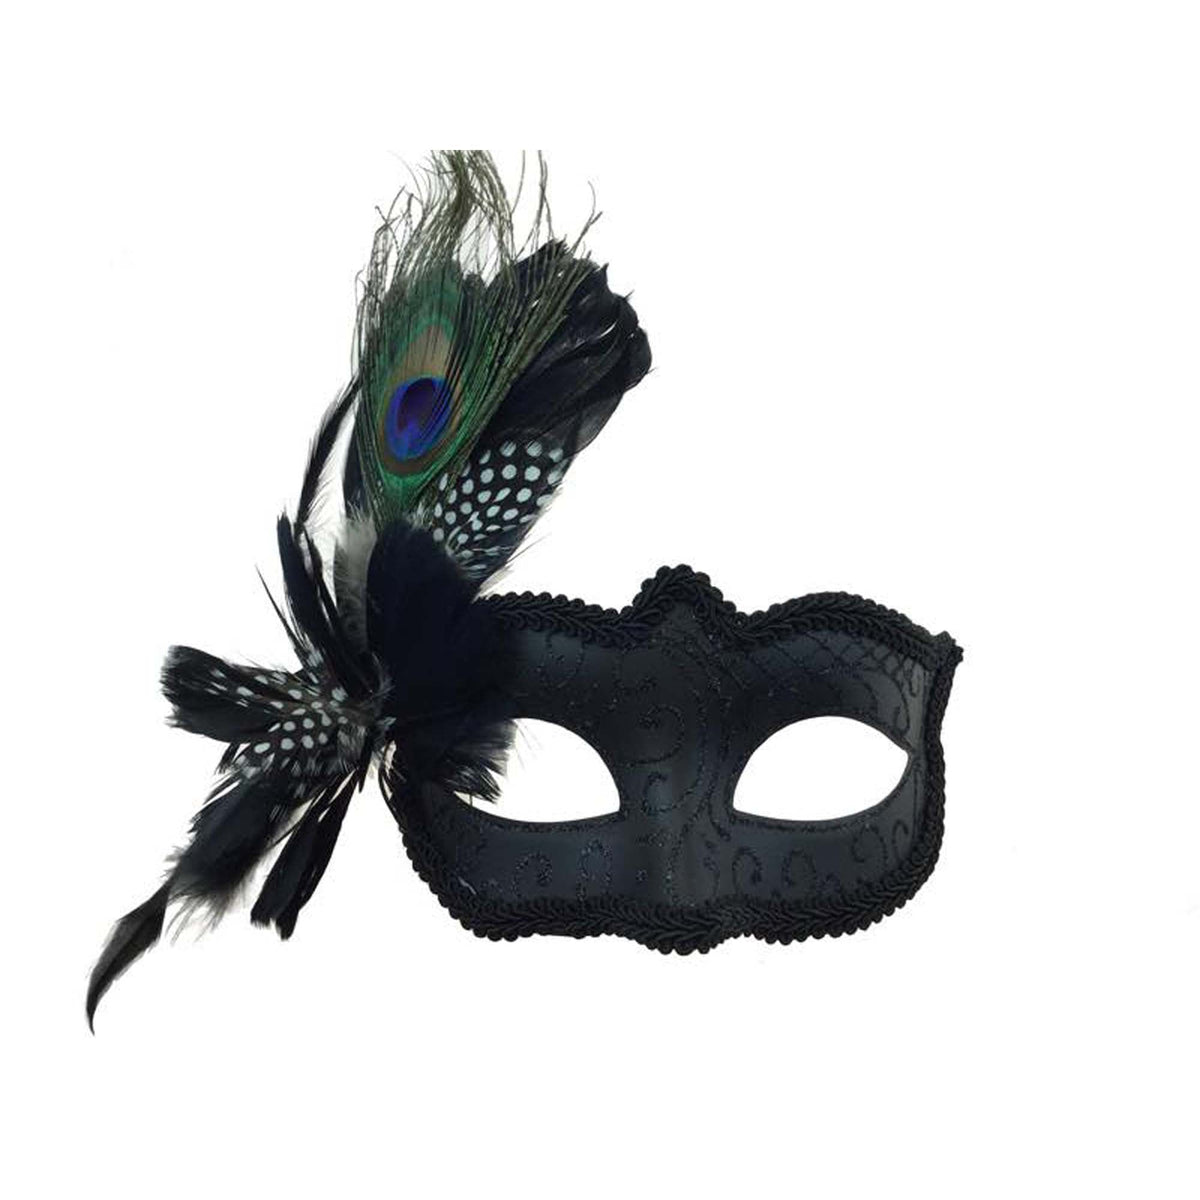 KBW GLOBAL CORP Costume Accessories Black Venitian Mask With Feather, 1 Count 831687016196